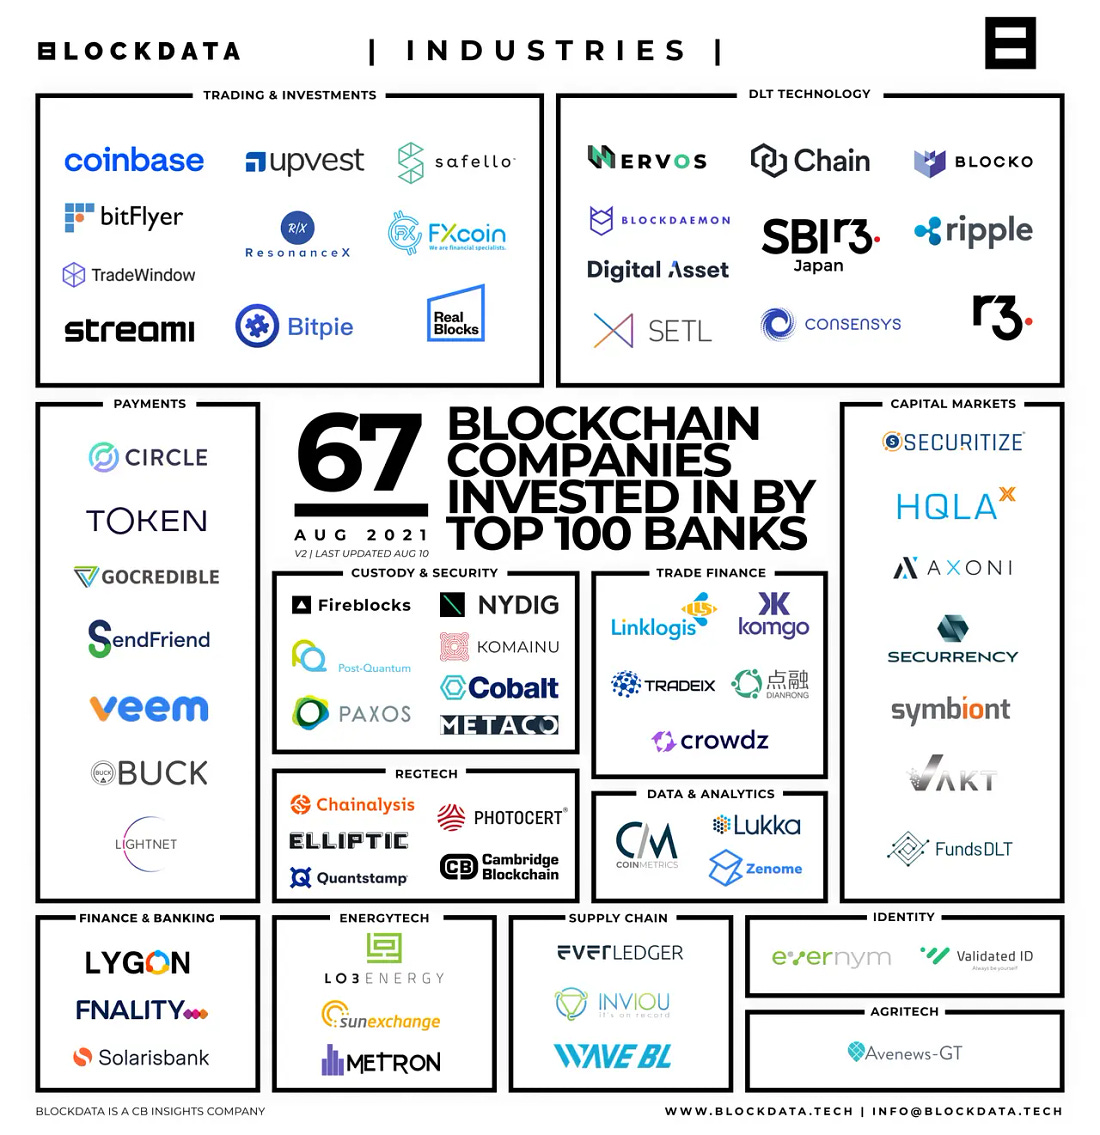 Blockchain companies invested in by top 100 banks